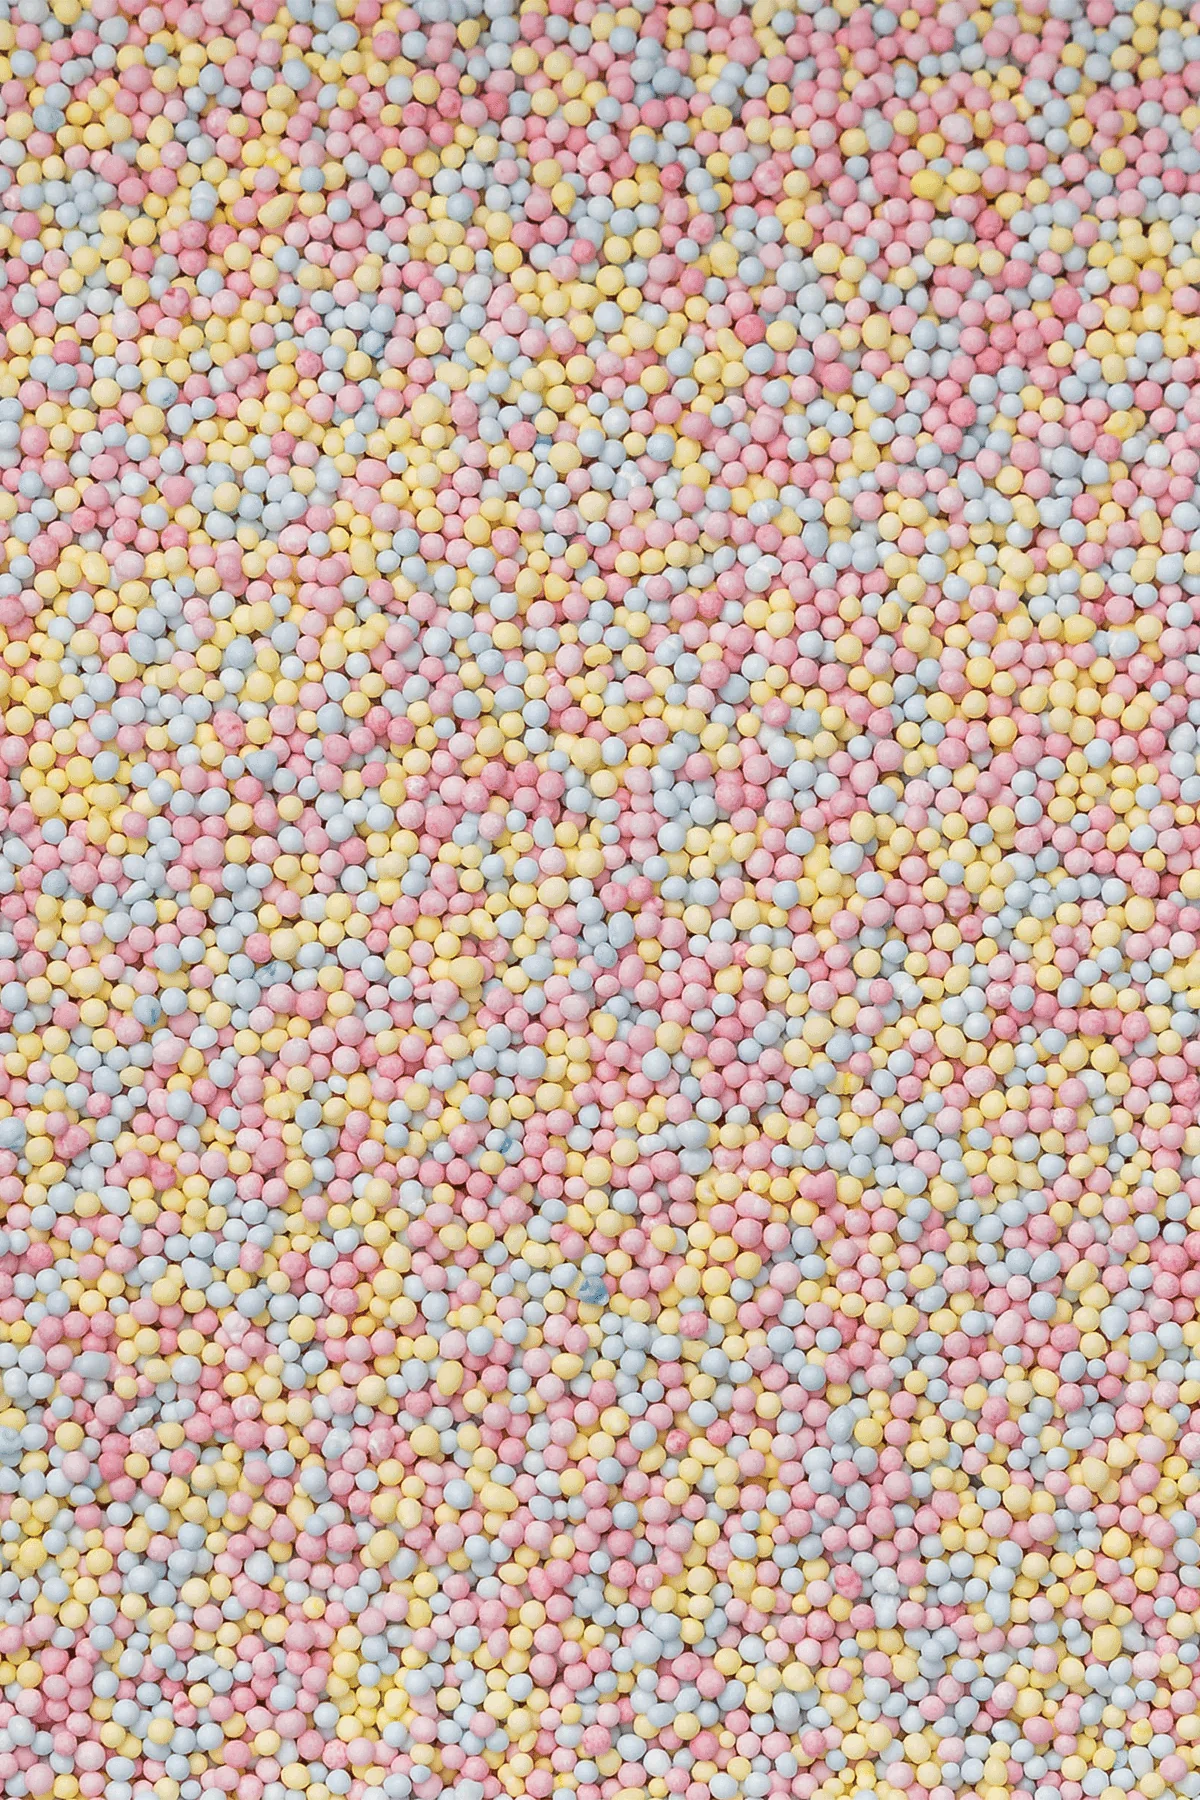 natural-100s-1000s-pink-yellow-blue-sprinkles-sprinkly-849875